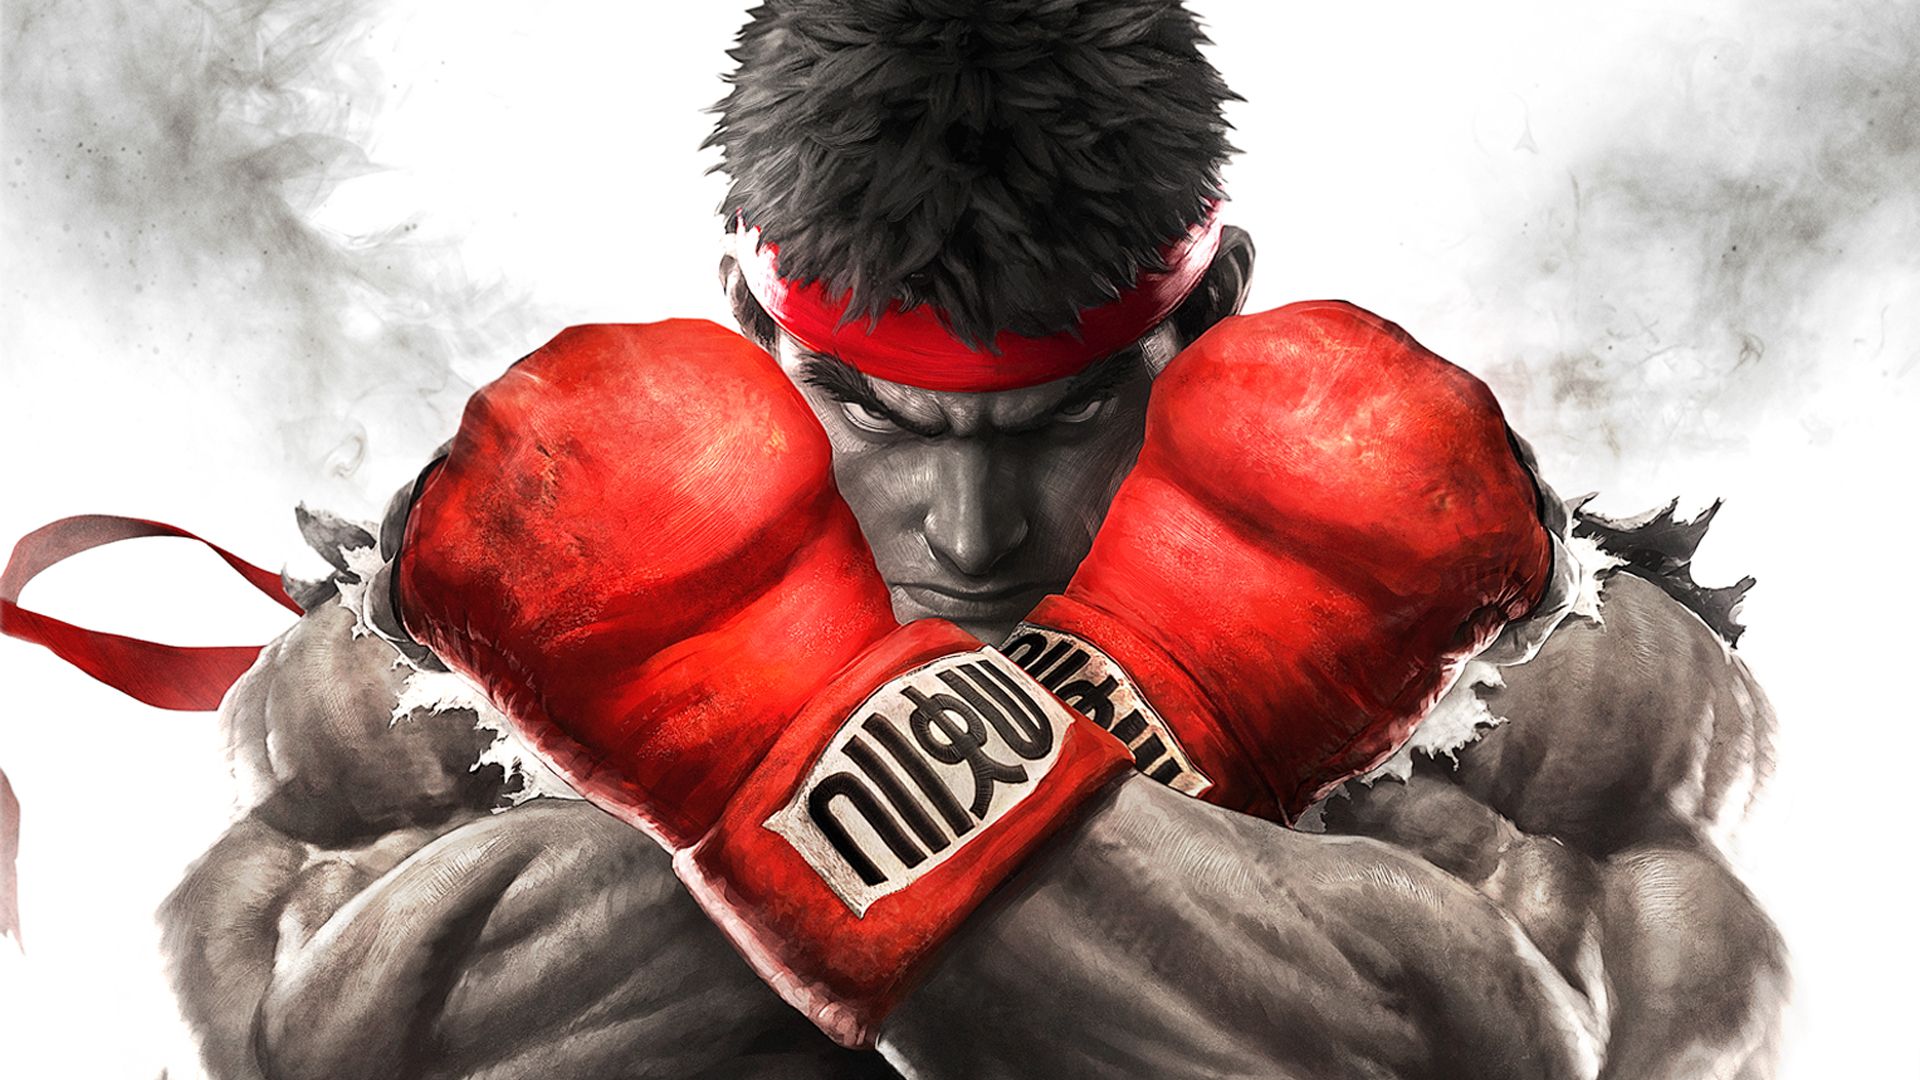 Street Fighter II Video Game HD Wallpapers HD Wallapers for Free